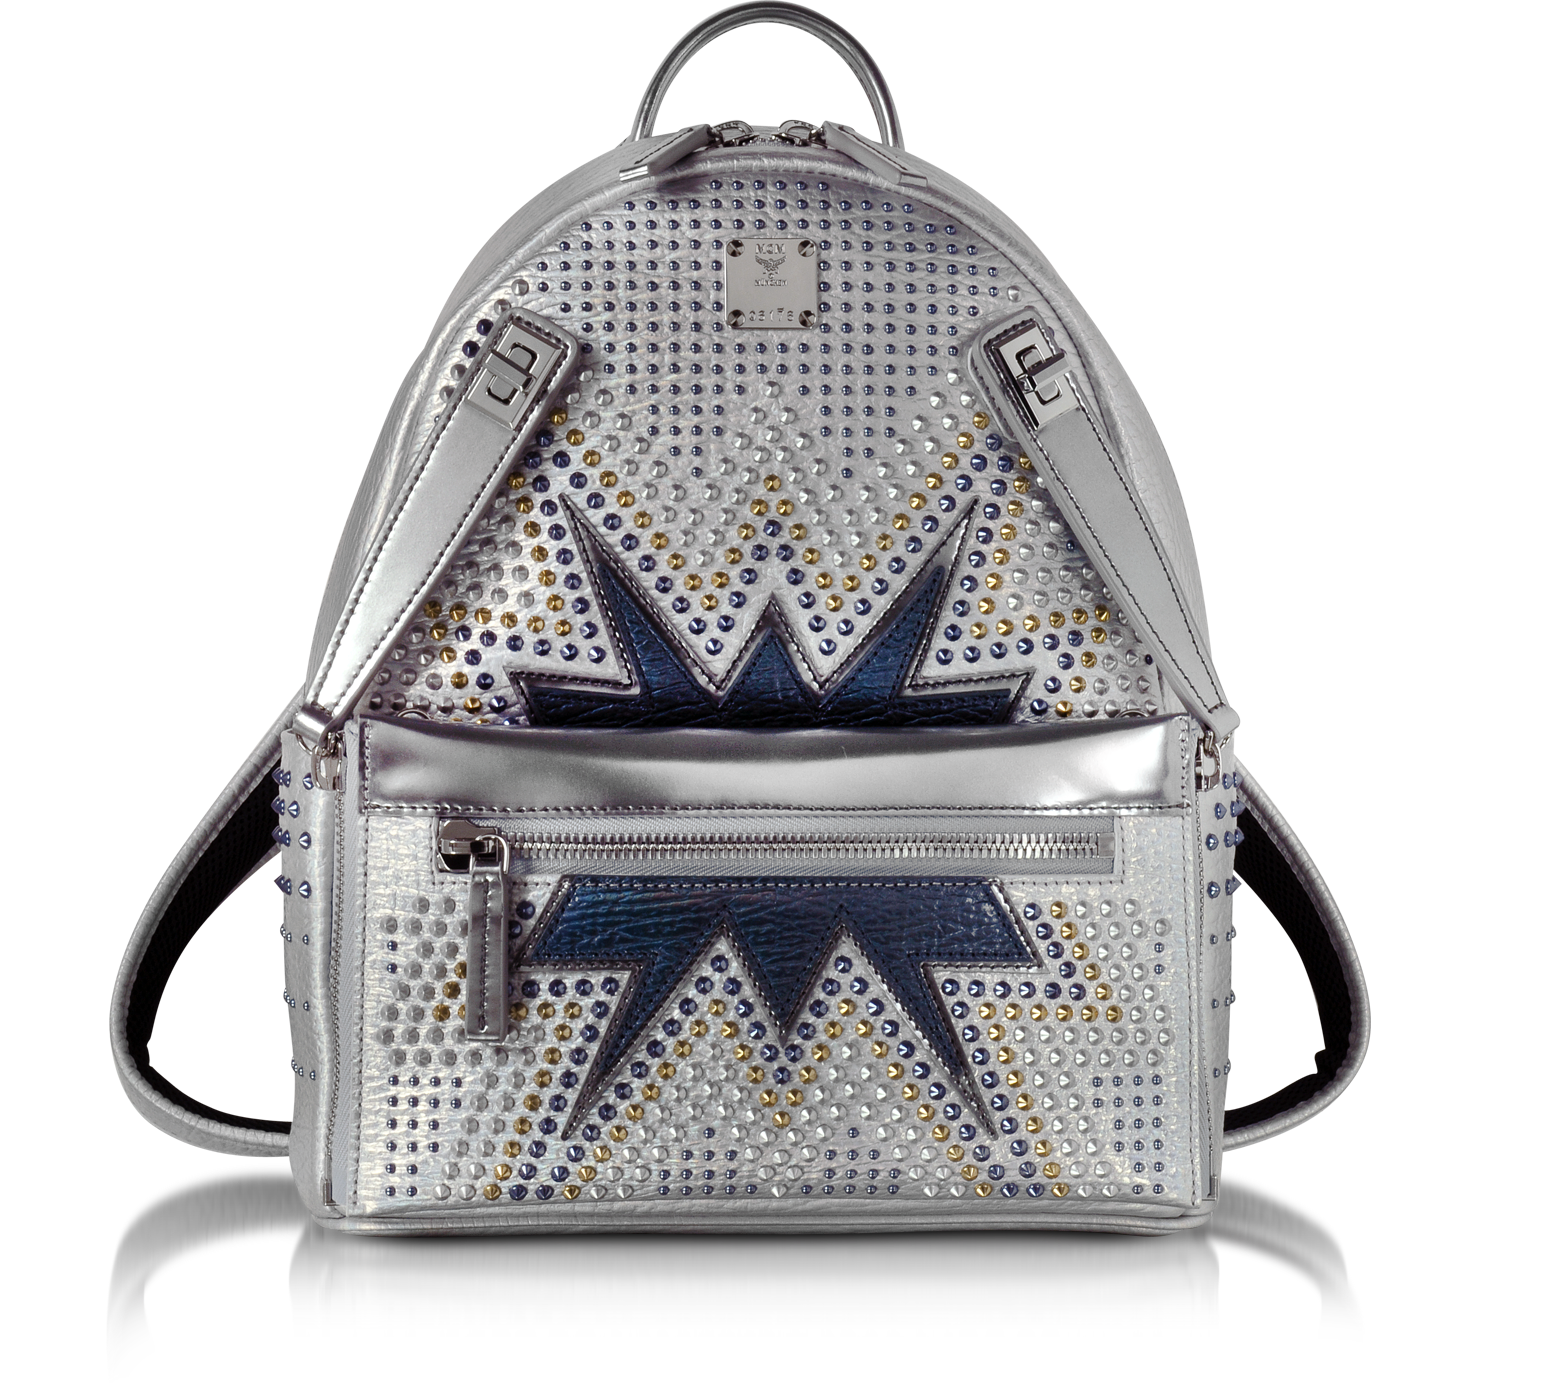 MCM White Flake Small Dual Stark Cyber Studs Backpack at FORZIERI